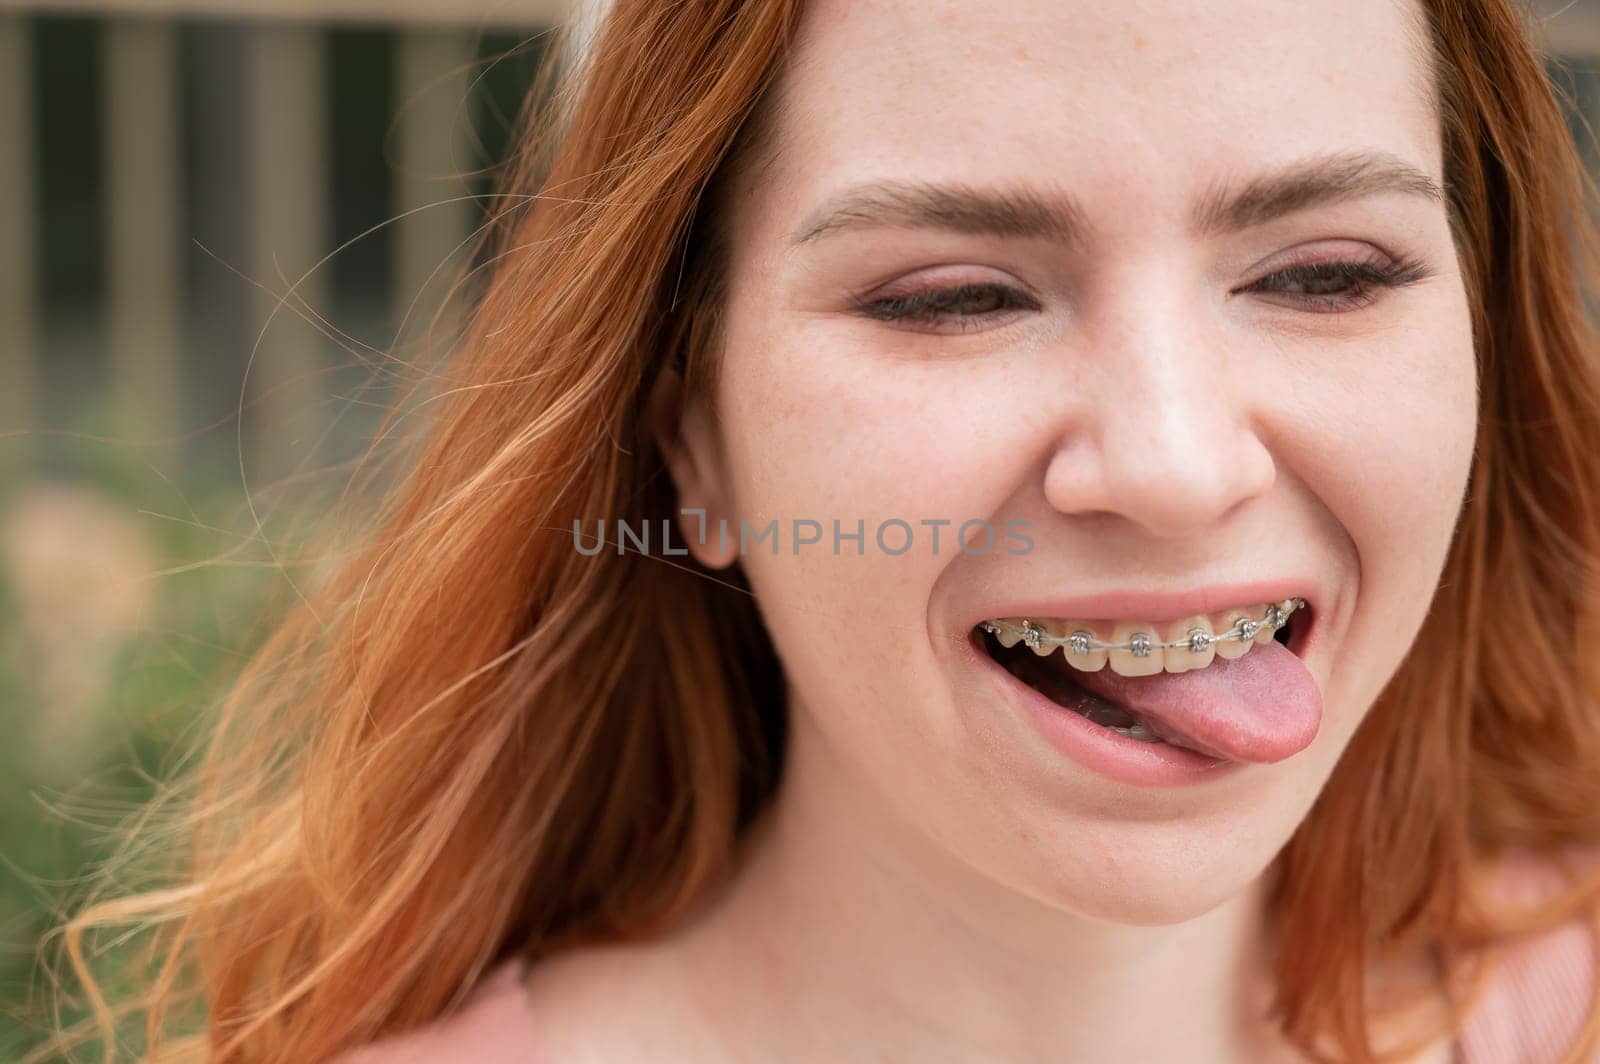 Young woman with braces on her teeth smiles and shows her tongue outdoors